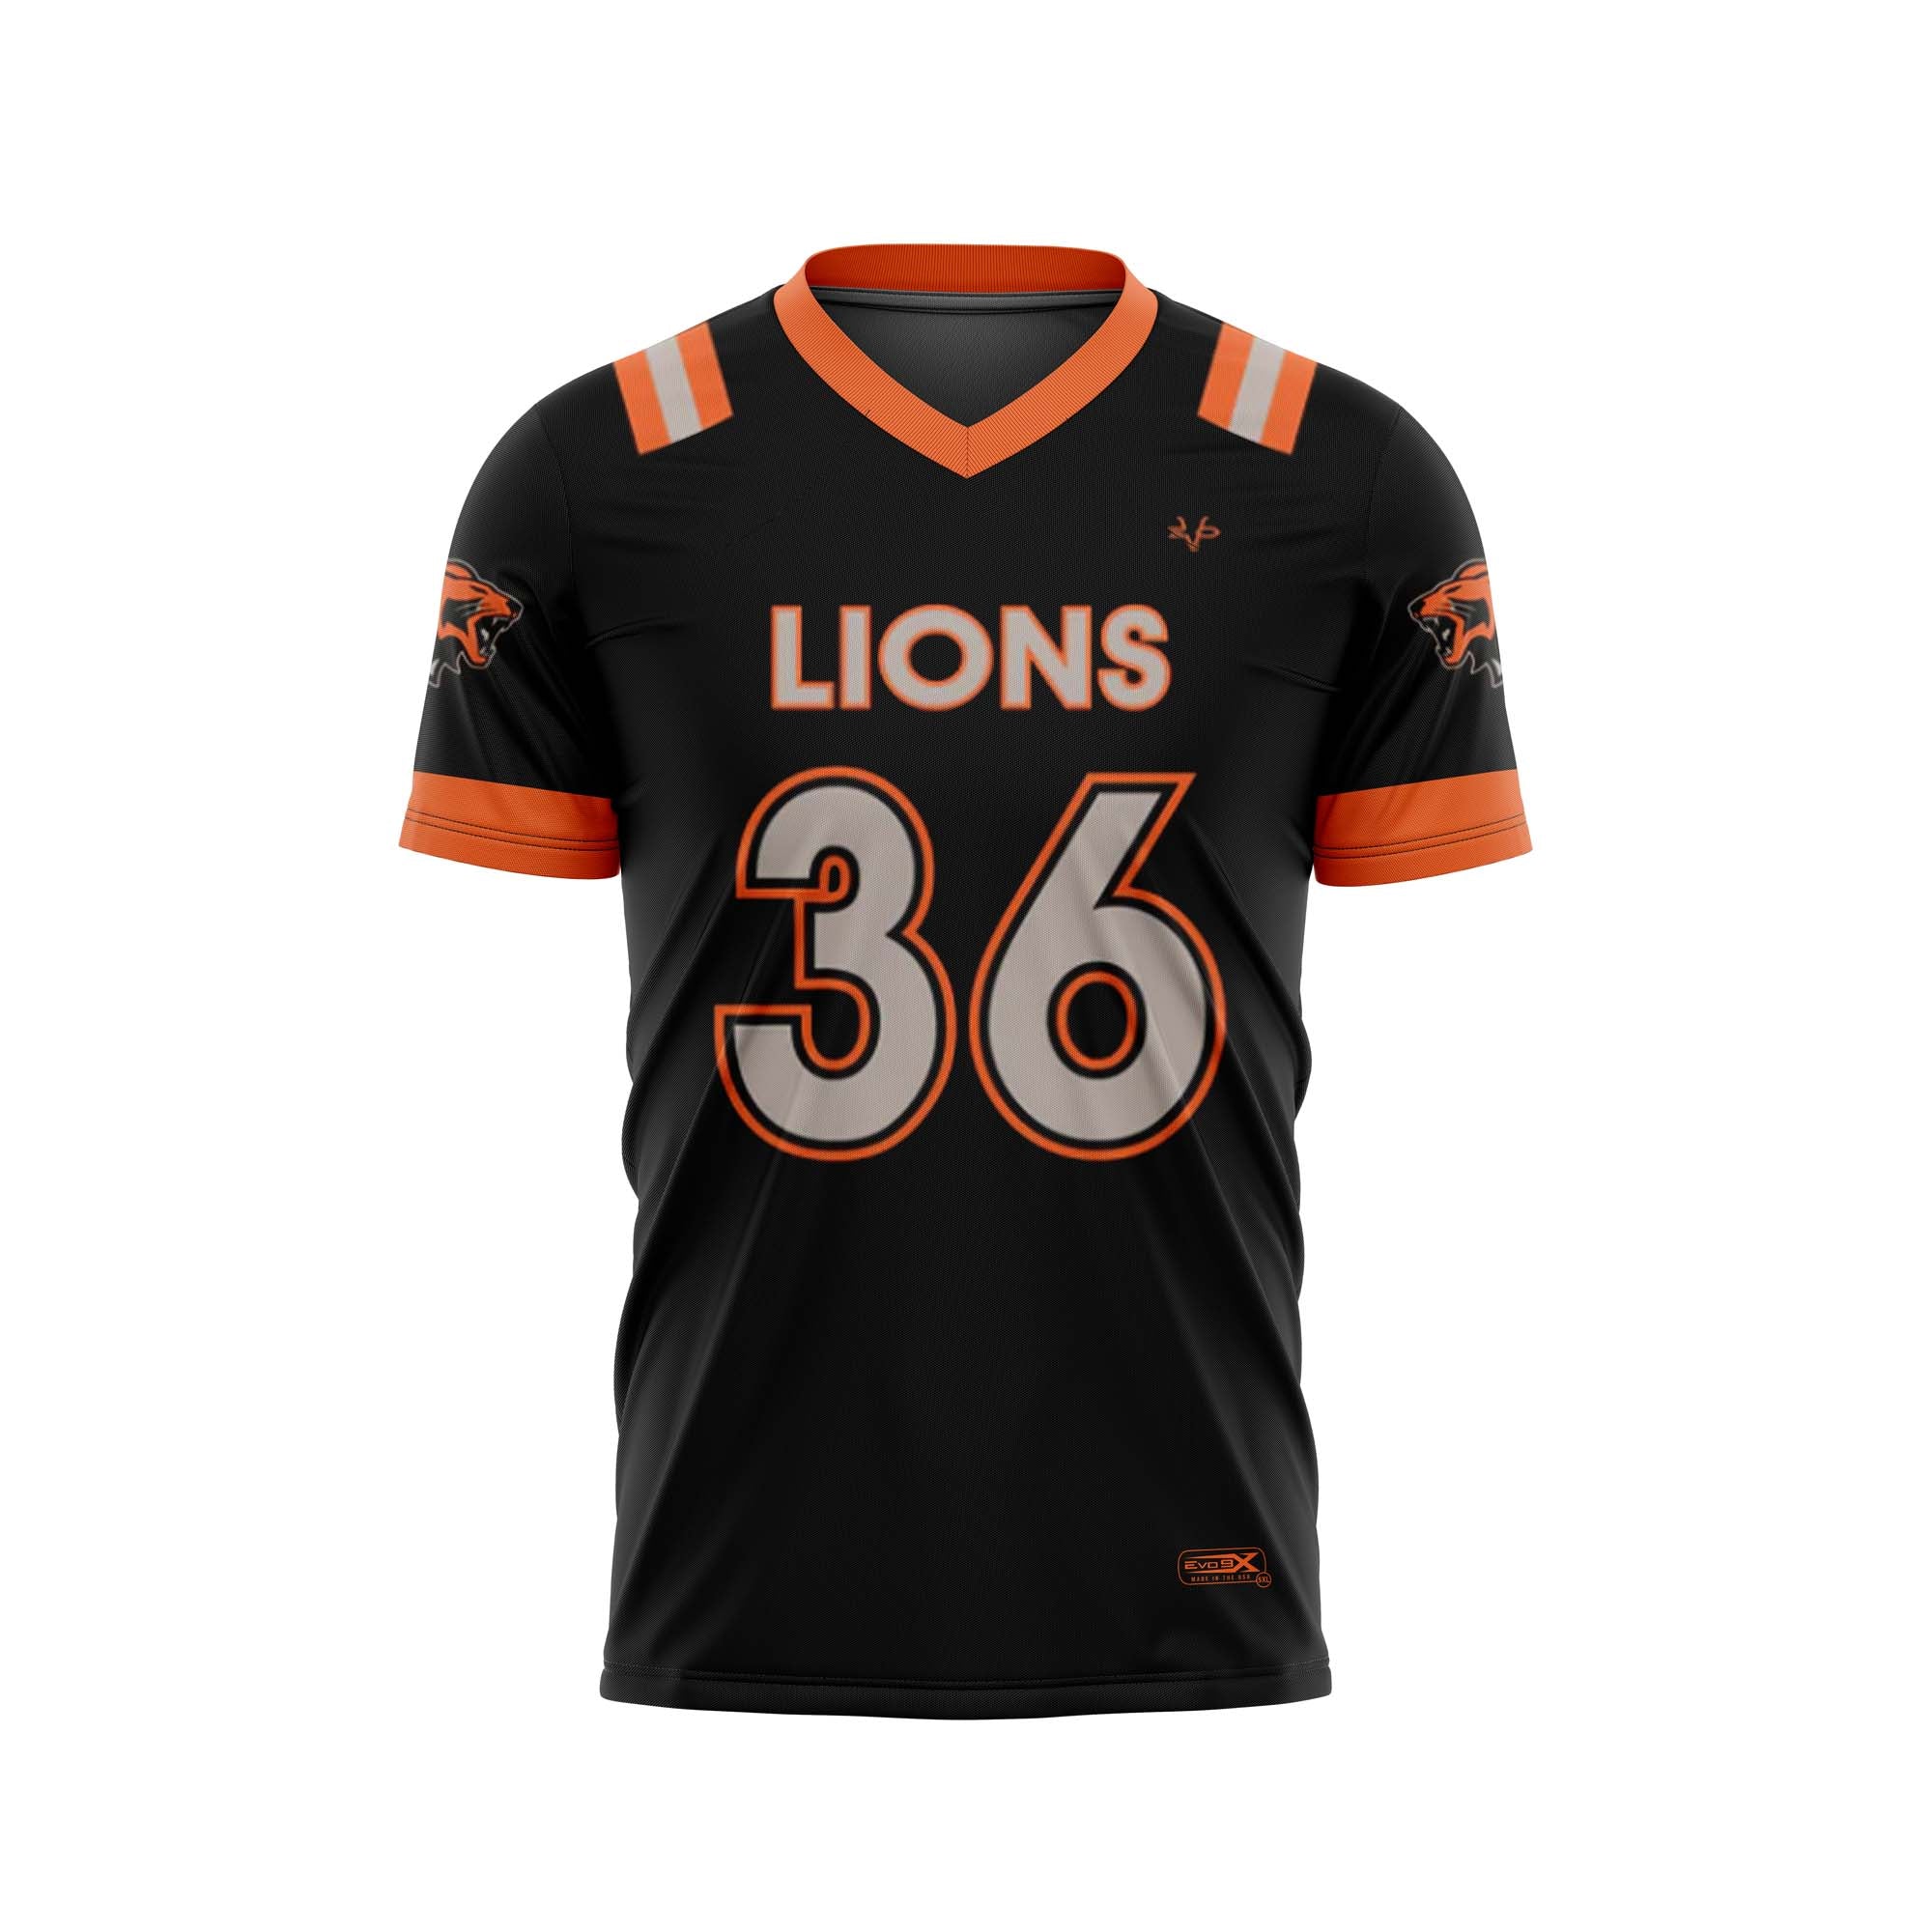 CHAIR CITY FOOTBALL Sublimated Fan Jersey